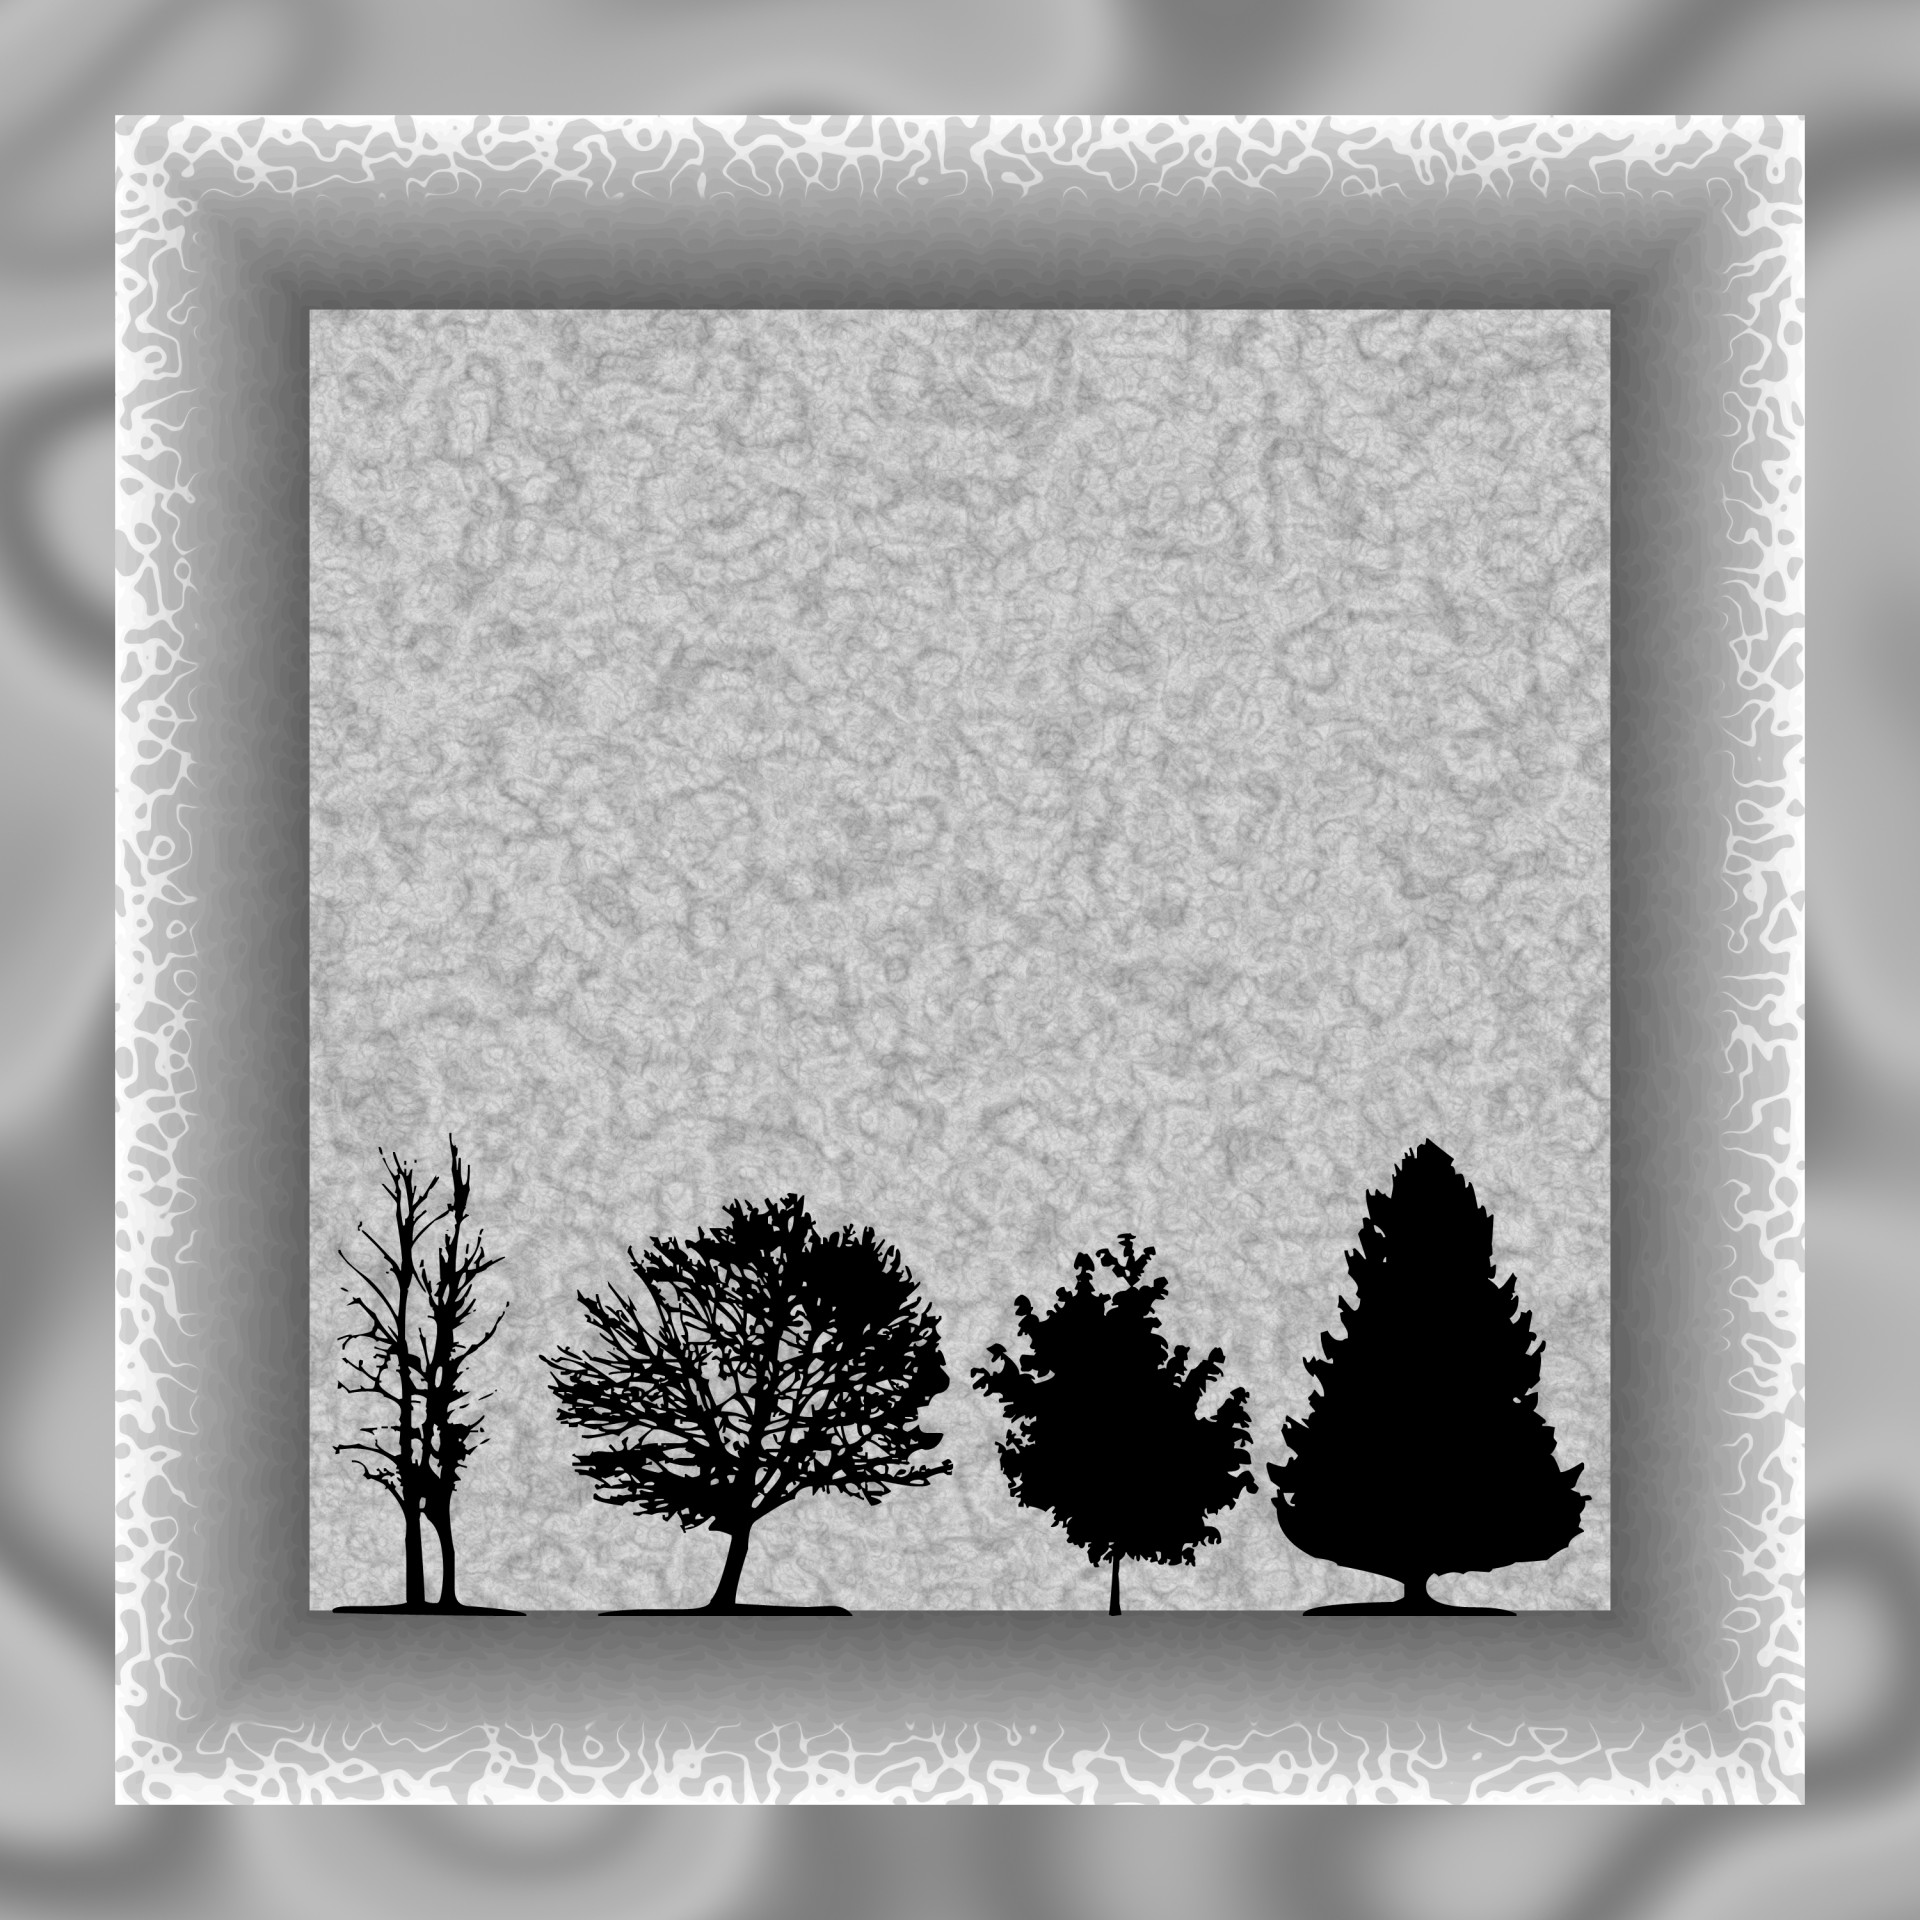 Grunge Frame With Silhouette Trees